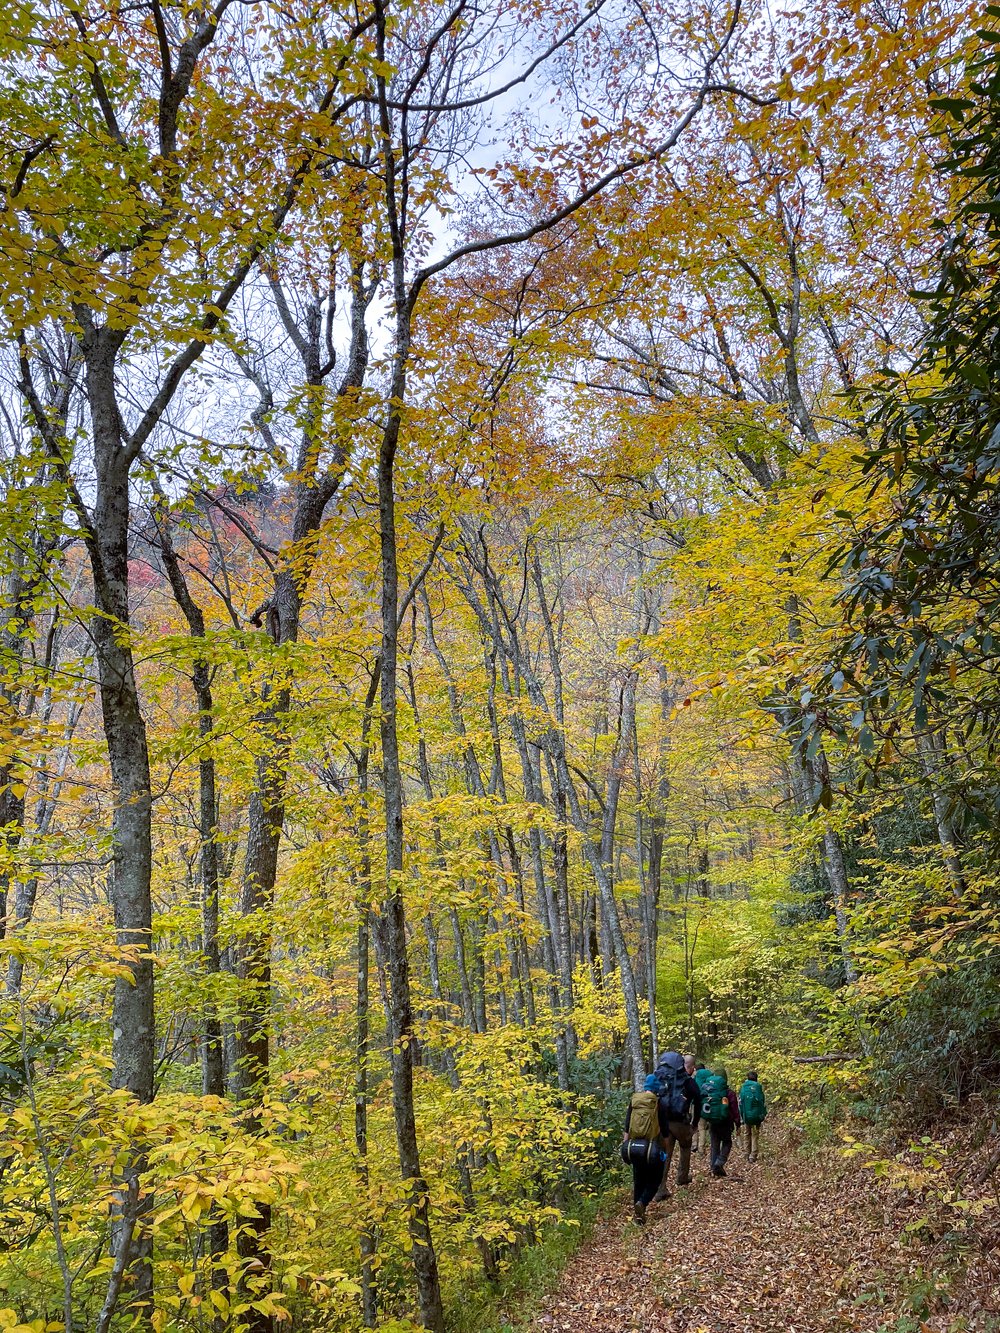  The author's group of hikers heads home from Kephart Shelter, a lean-to found along a trail on the North Carolina side of the park. The trees offer one last celebration of fall’s fireworks. Image credit: Jeffrey Rose, edits by Rachel Lense for The S